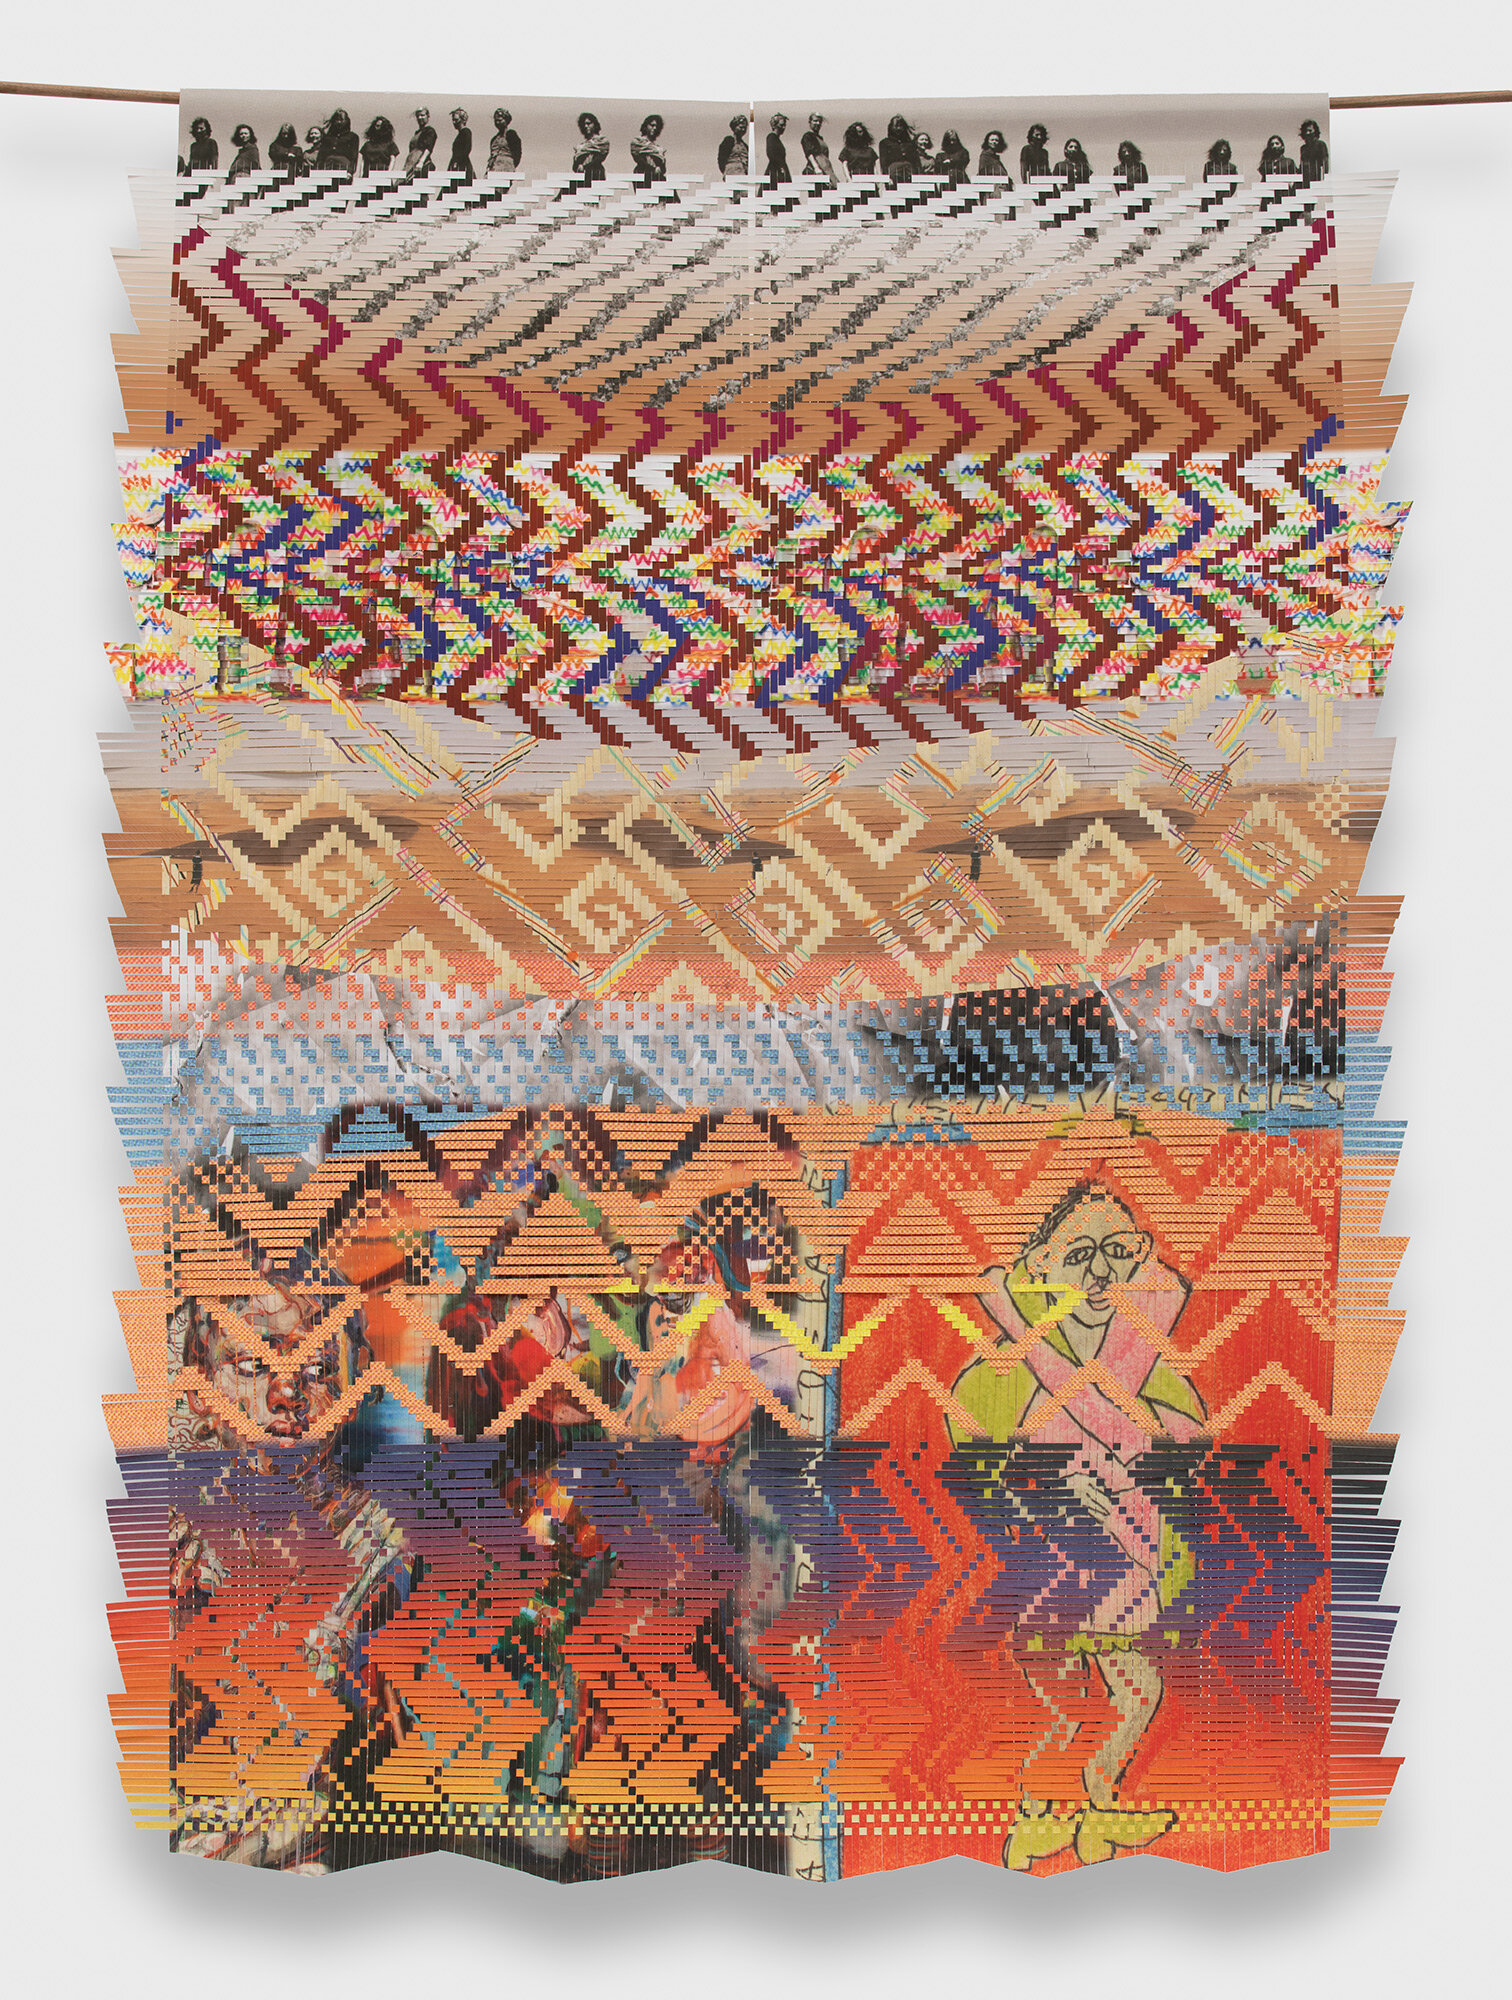 Cultural Fabric (Bay Area), 2019, woven archival inkjet prints on paper, 90 x 66 in. San Francisco Arts Commission collection at San Francisco International Airport.